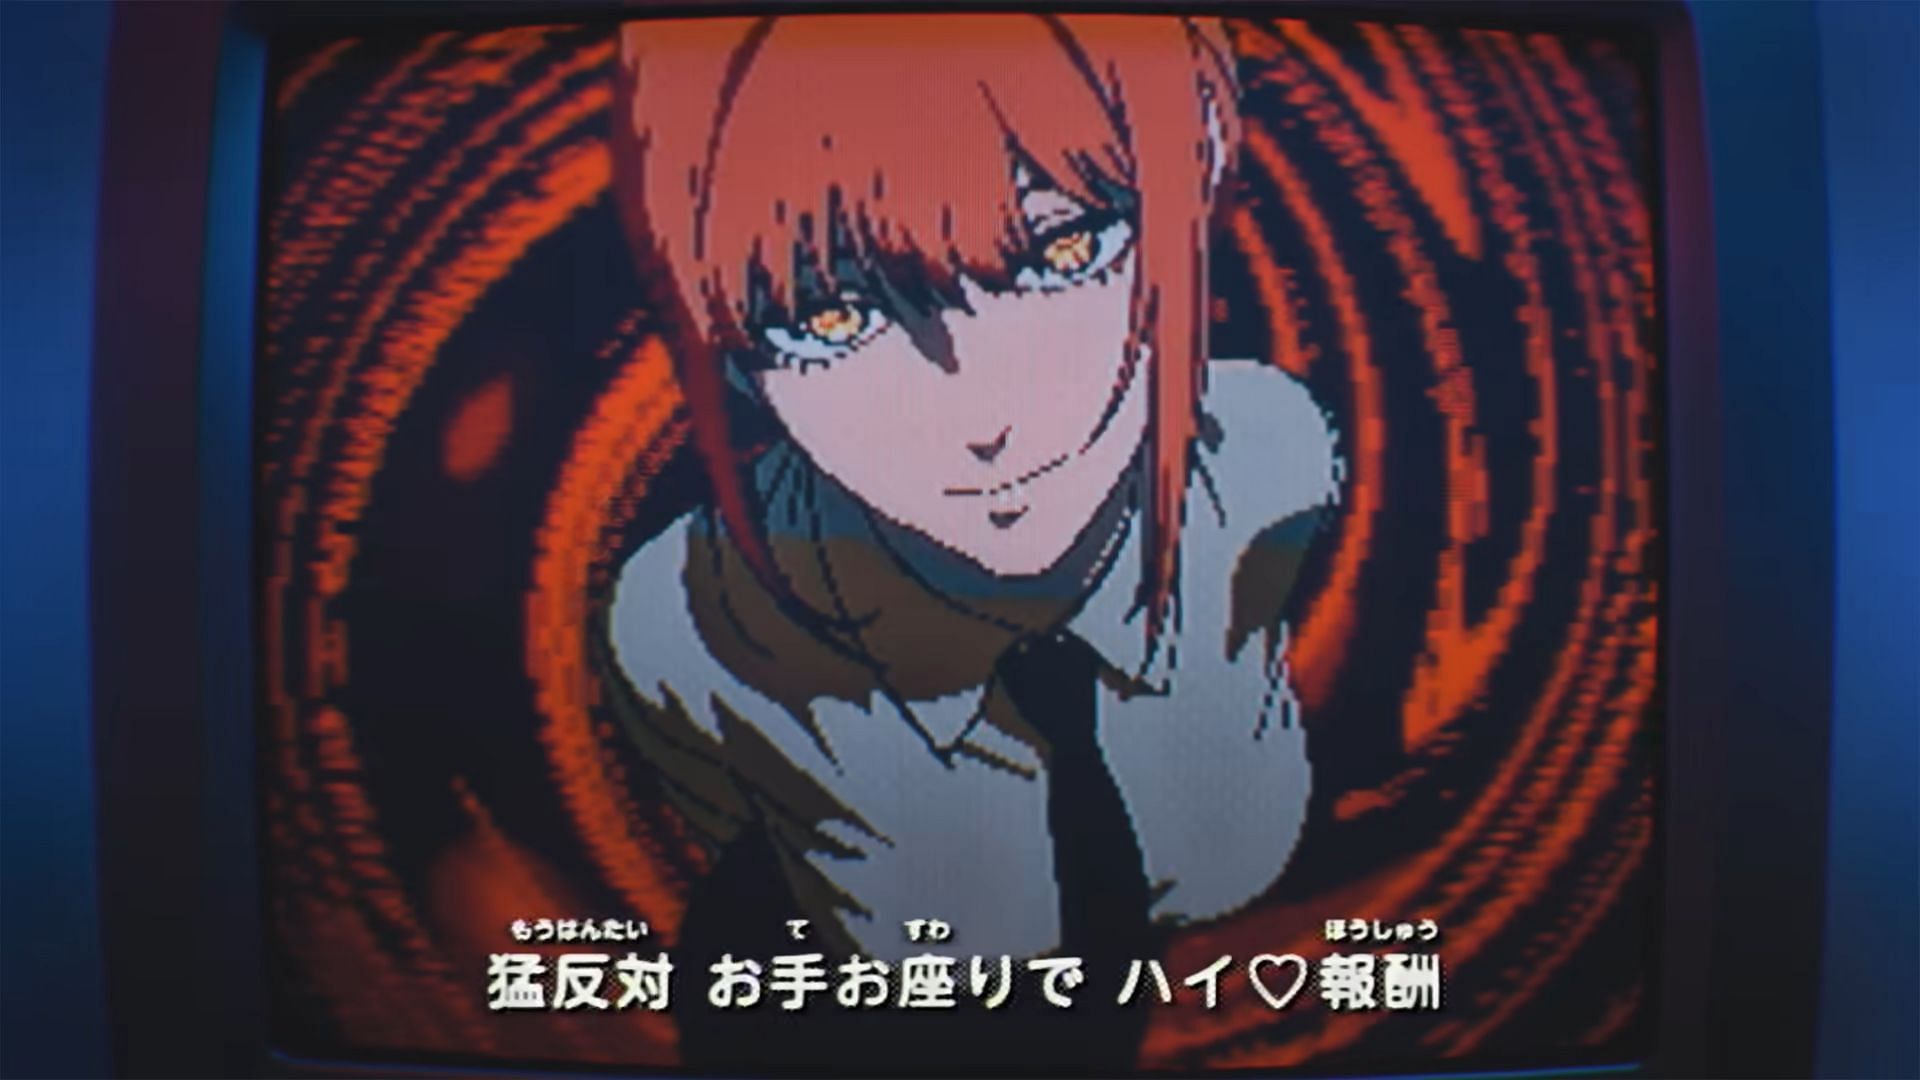 Makima as seen in Chainsaw Man ending 7 (Image via MAPPA)